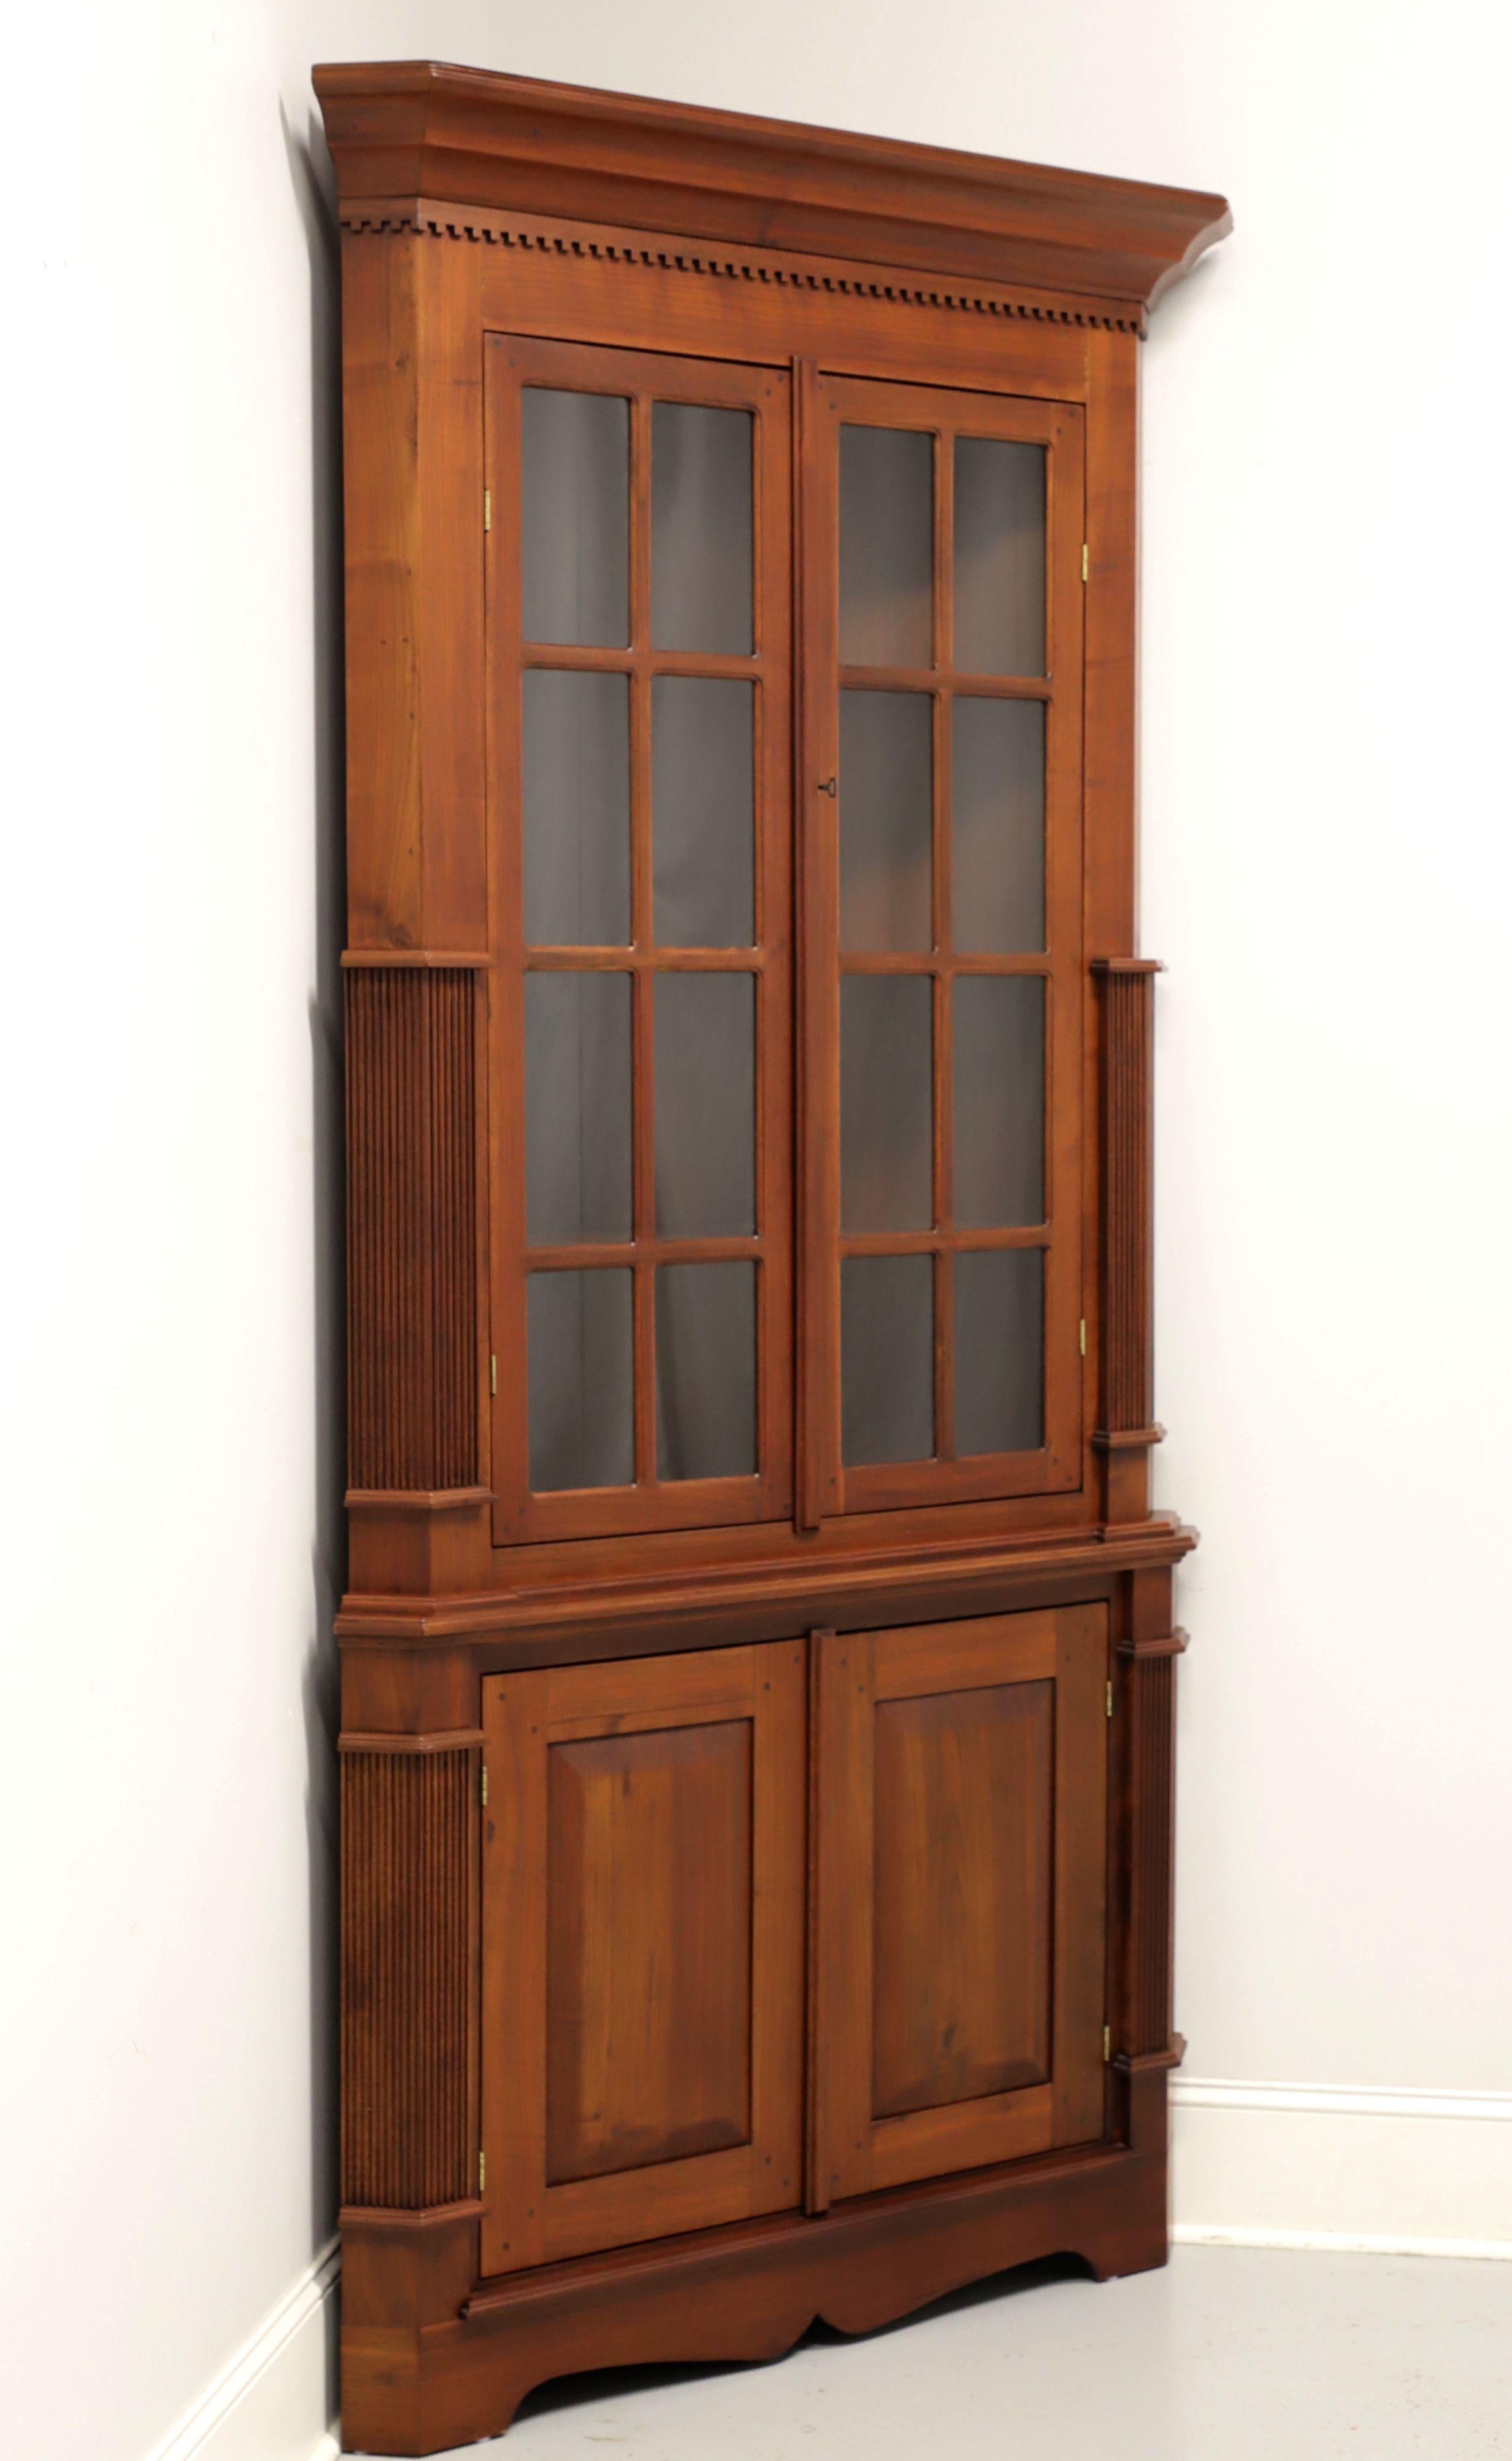 An extra tall Chippendale style corner cabinet, unbranded. Solid walnut with brass hardware, crown & dentil molding, fluted side columns and bracket feet. Upper cabinet features three fixed wooden display shelves behind a pair of paned glass doors.